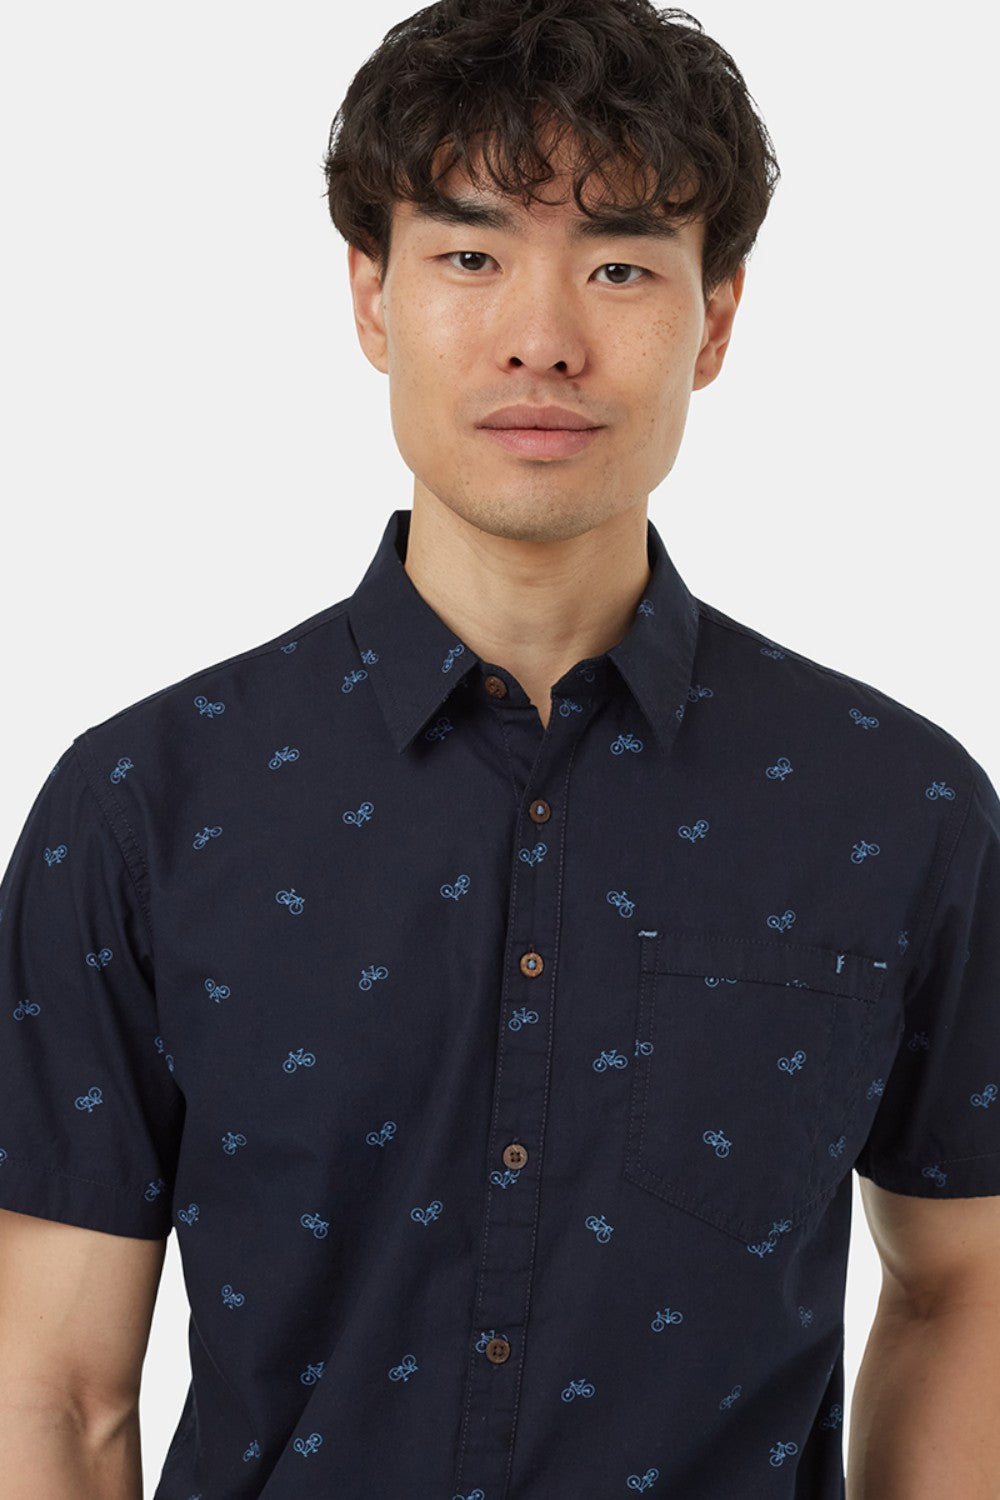 Biking is better for the planet. So is wearing this organic cotton shirt that cuts down on waste, CO2 emissions, and harsh chemicals. Why not do both?